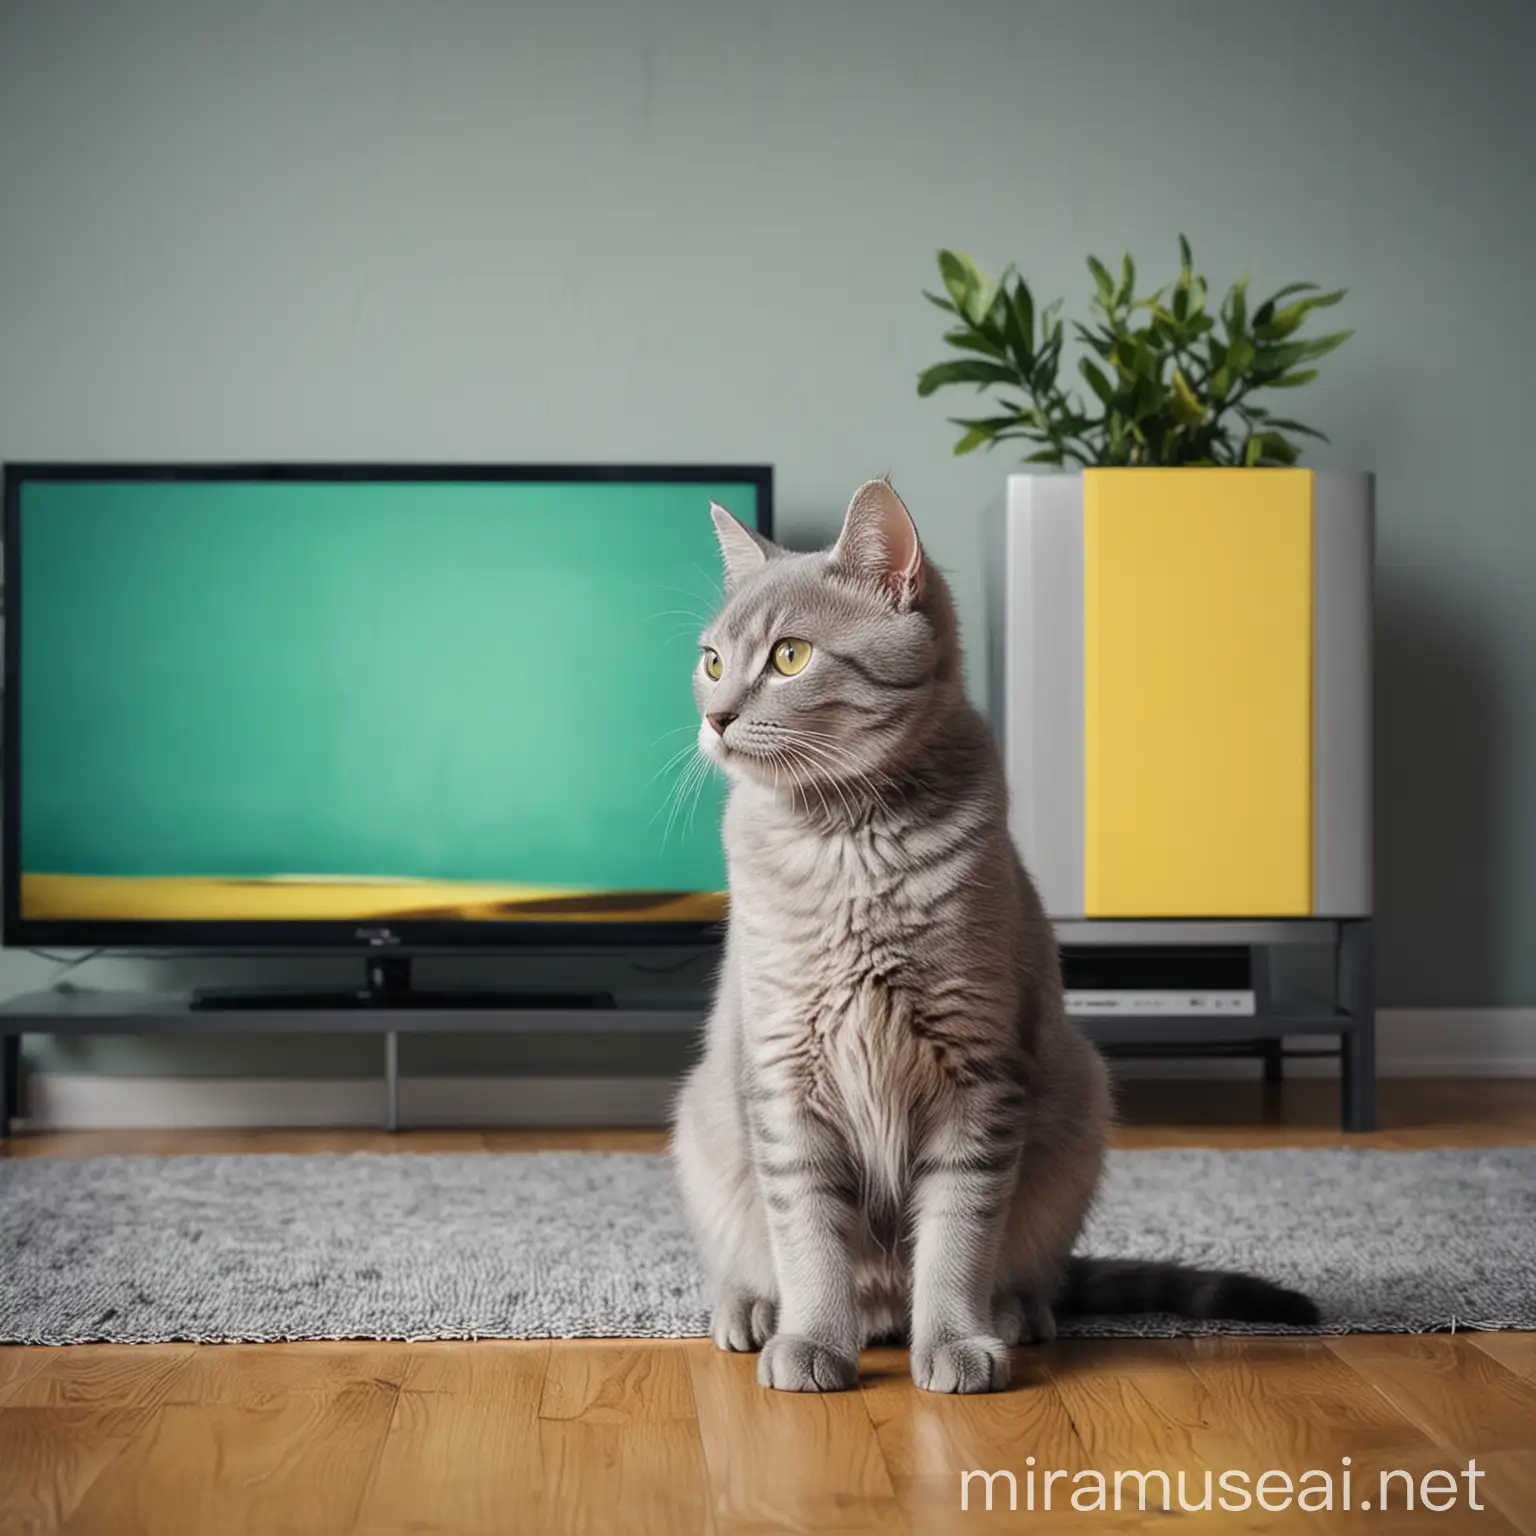 Gray Kitty Relaxing by Modern Television in Bluish Green and Yellow Tones